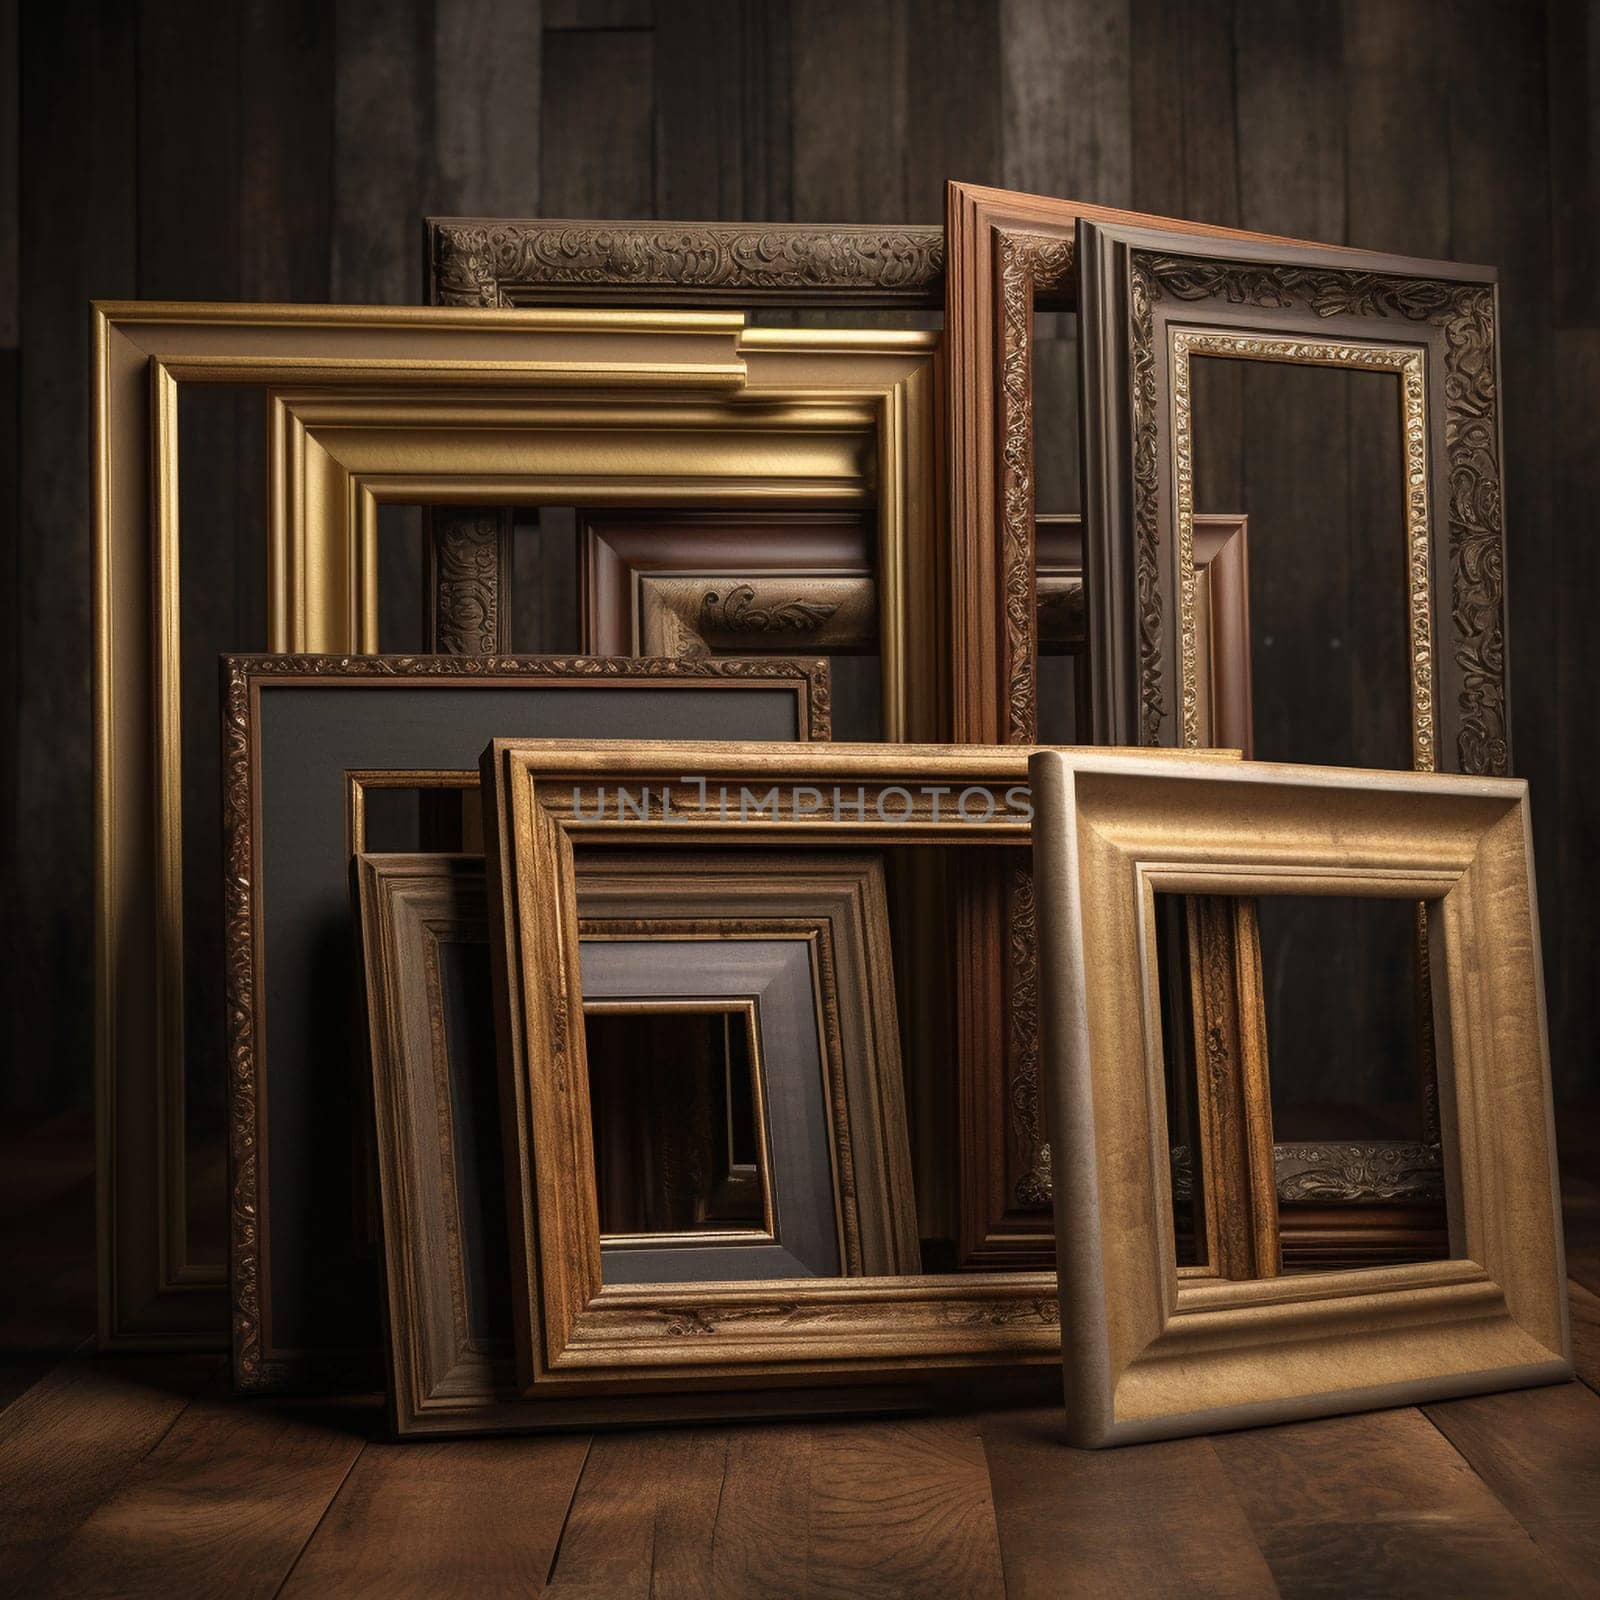 Explore the beauty and functionality of wooden picture frames, and learn about the different types of designs and finishes used to create these stunning pieces. With their unique designs and finishes, wooden picture frames not only showcase the beauty of the artwork they contain but also highlight the artistry and attention to detail of the woodworker. From classic to modern designs, wooden picture frames are a timeless classic that continue to be appreciated by many.